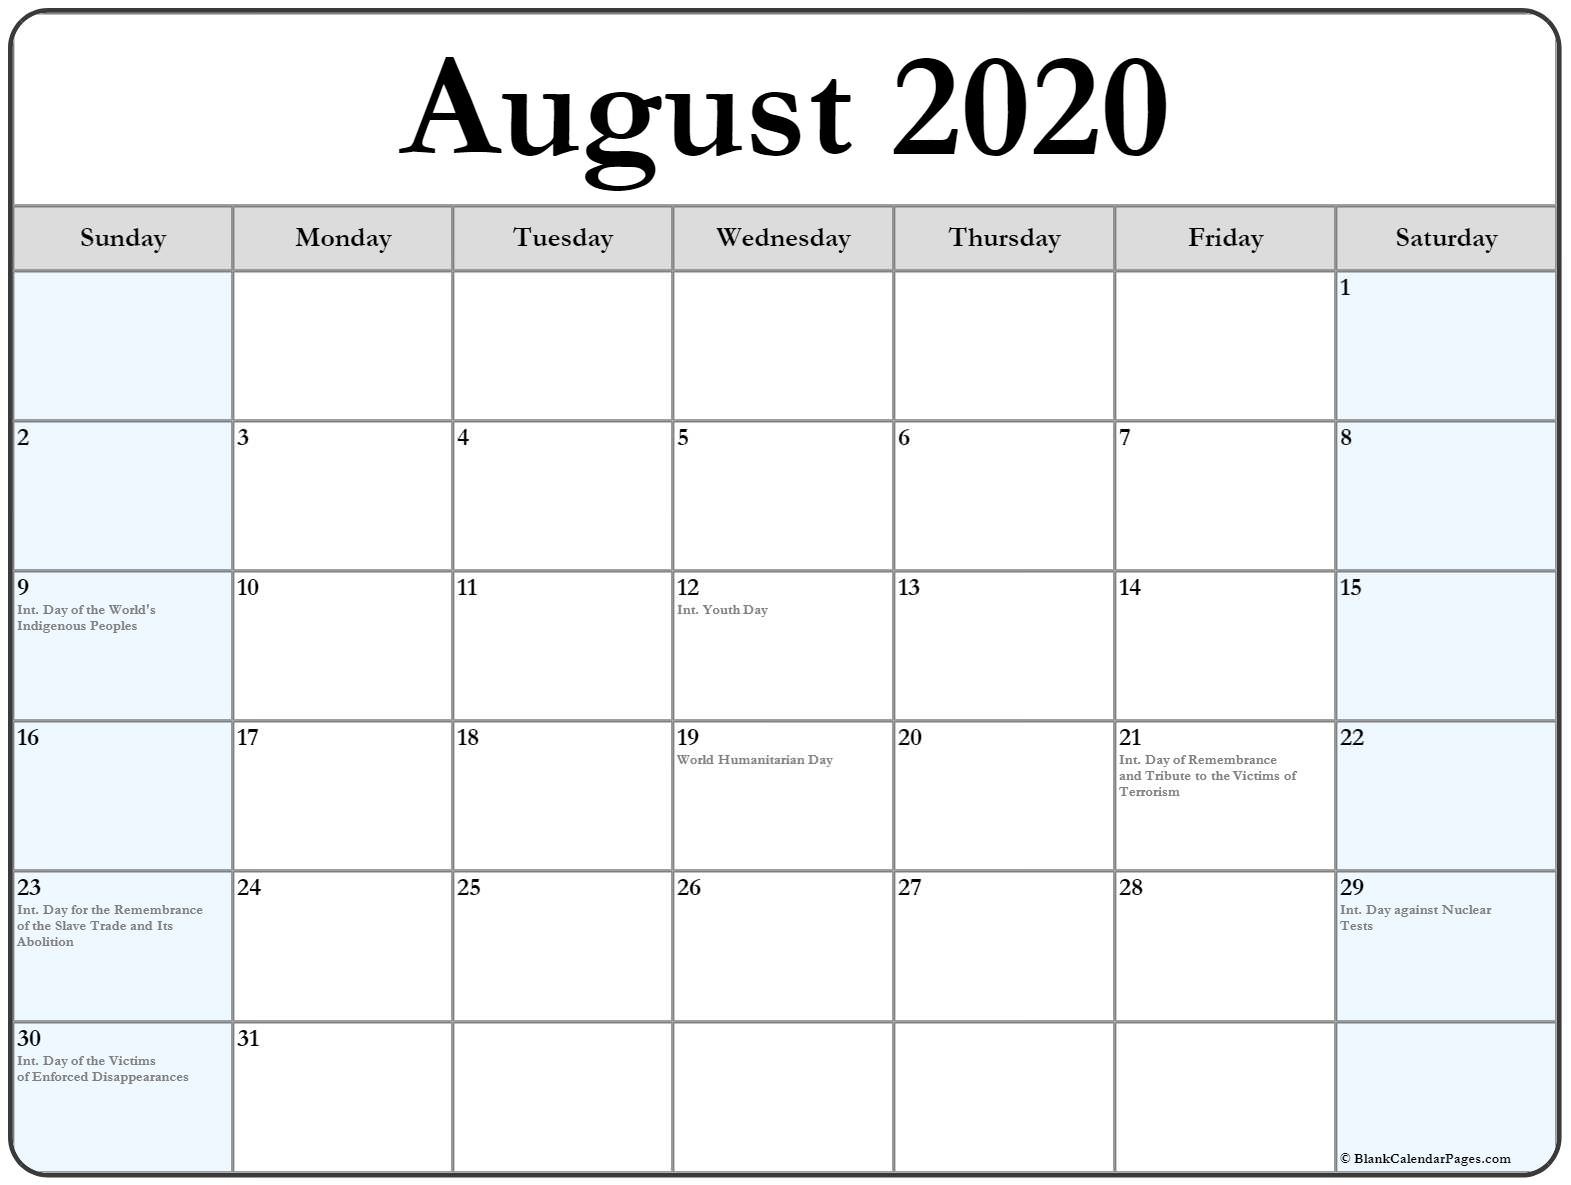 Collection of August 2020 calendars with holidays